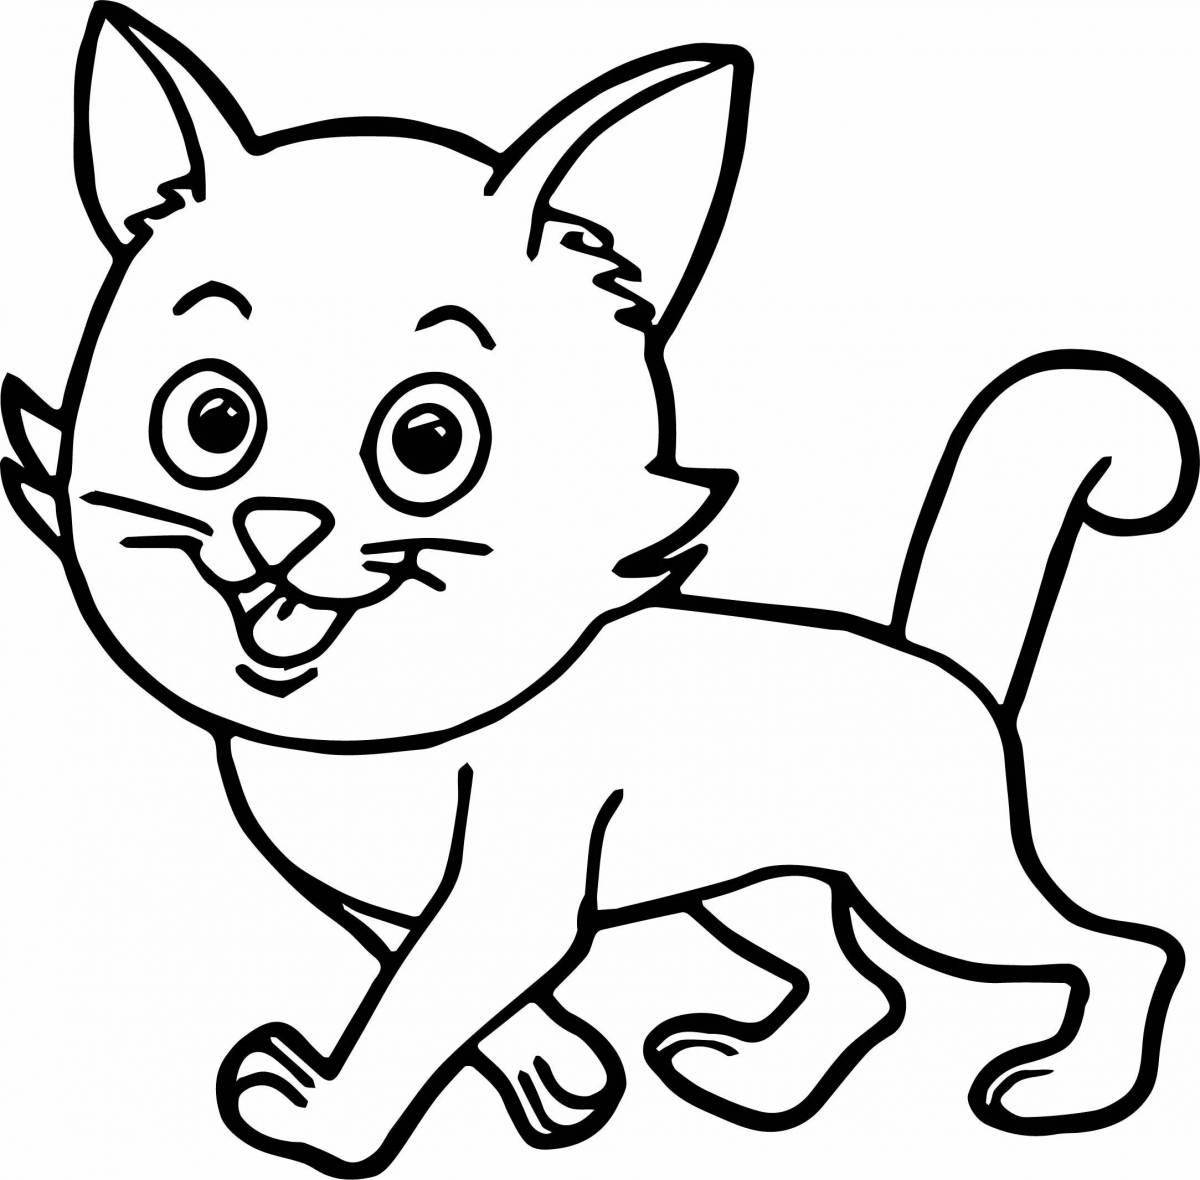 Coloring funny cat for kids